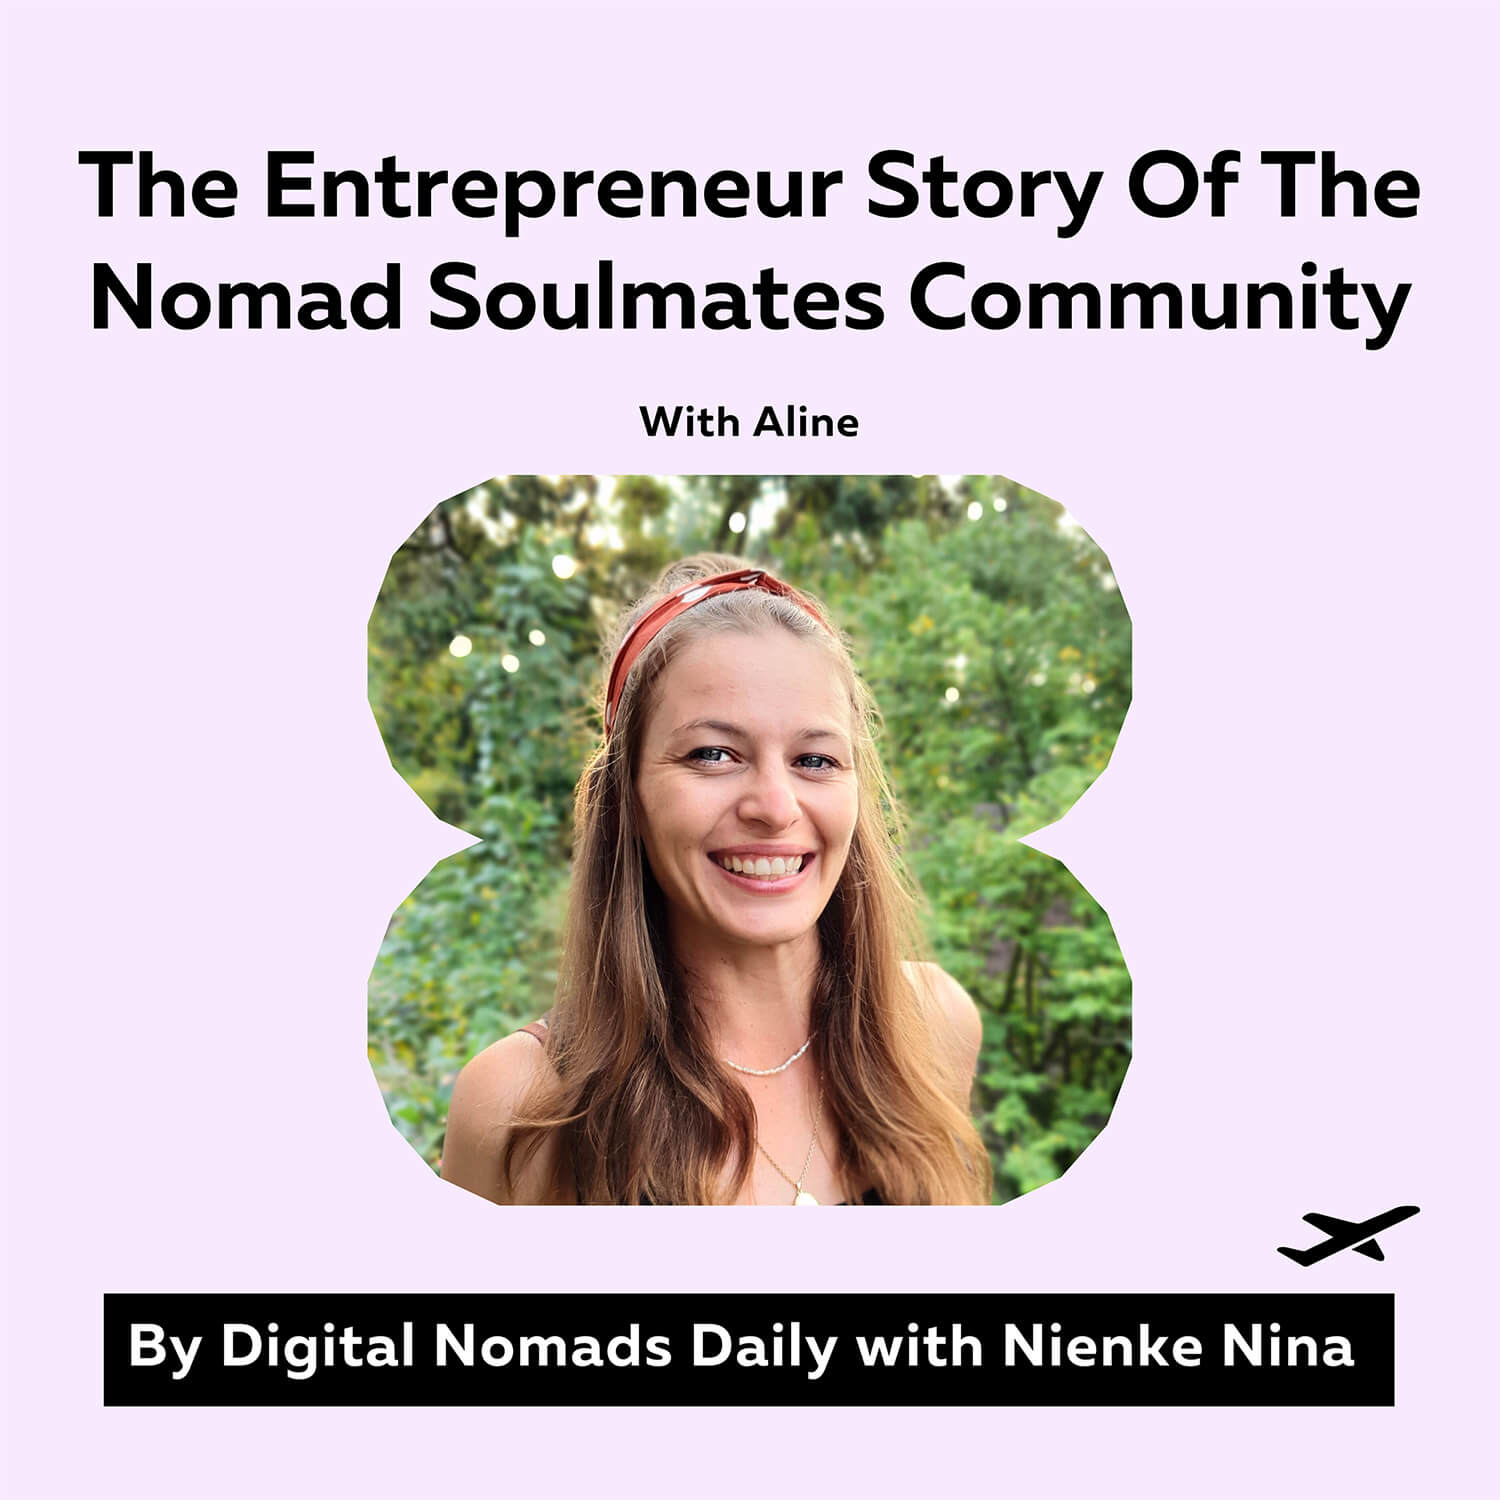 Cover photo of the Digital Nomads Daily Podcast The Entrepreneur Story Of The Nomad Soulmates Community With Aline (1)